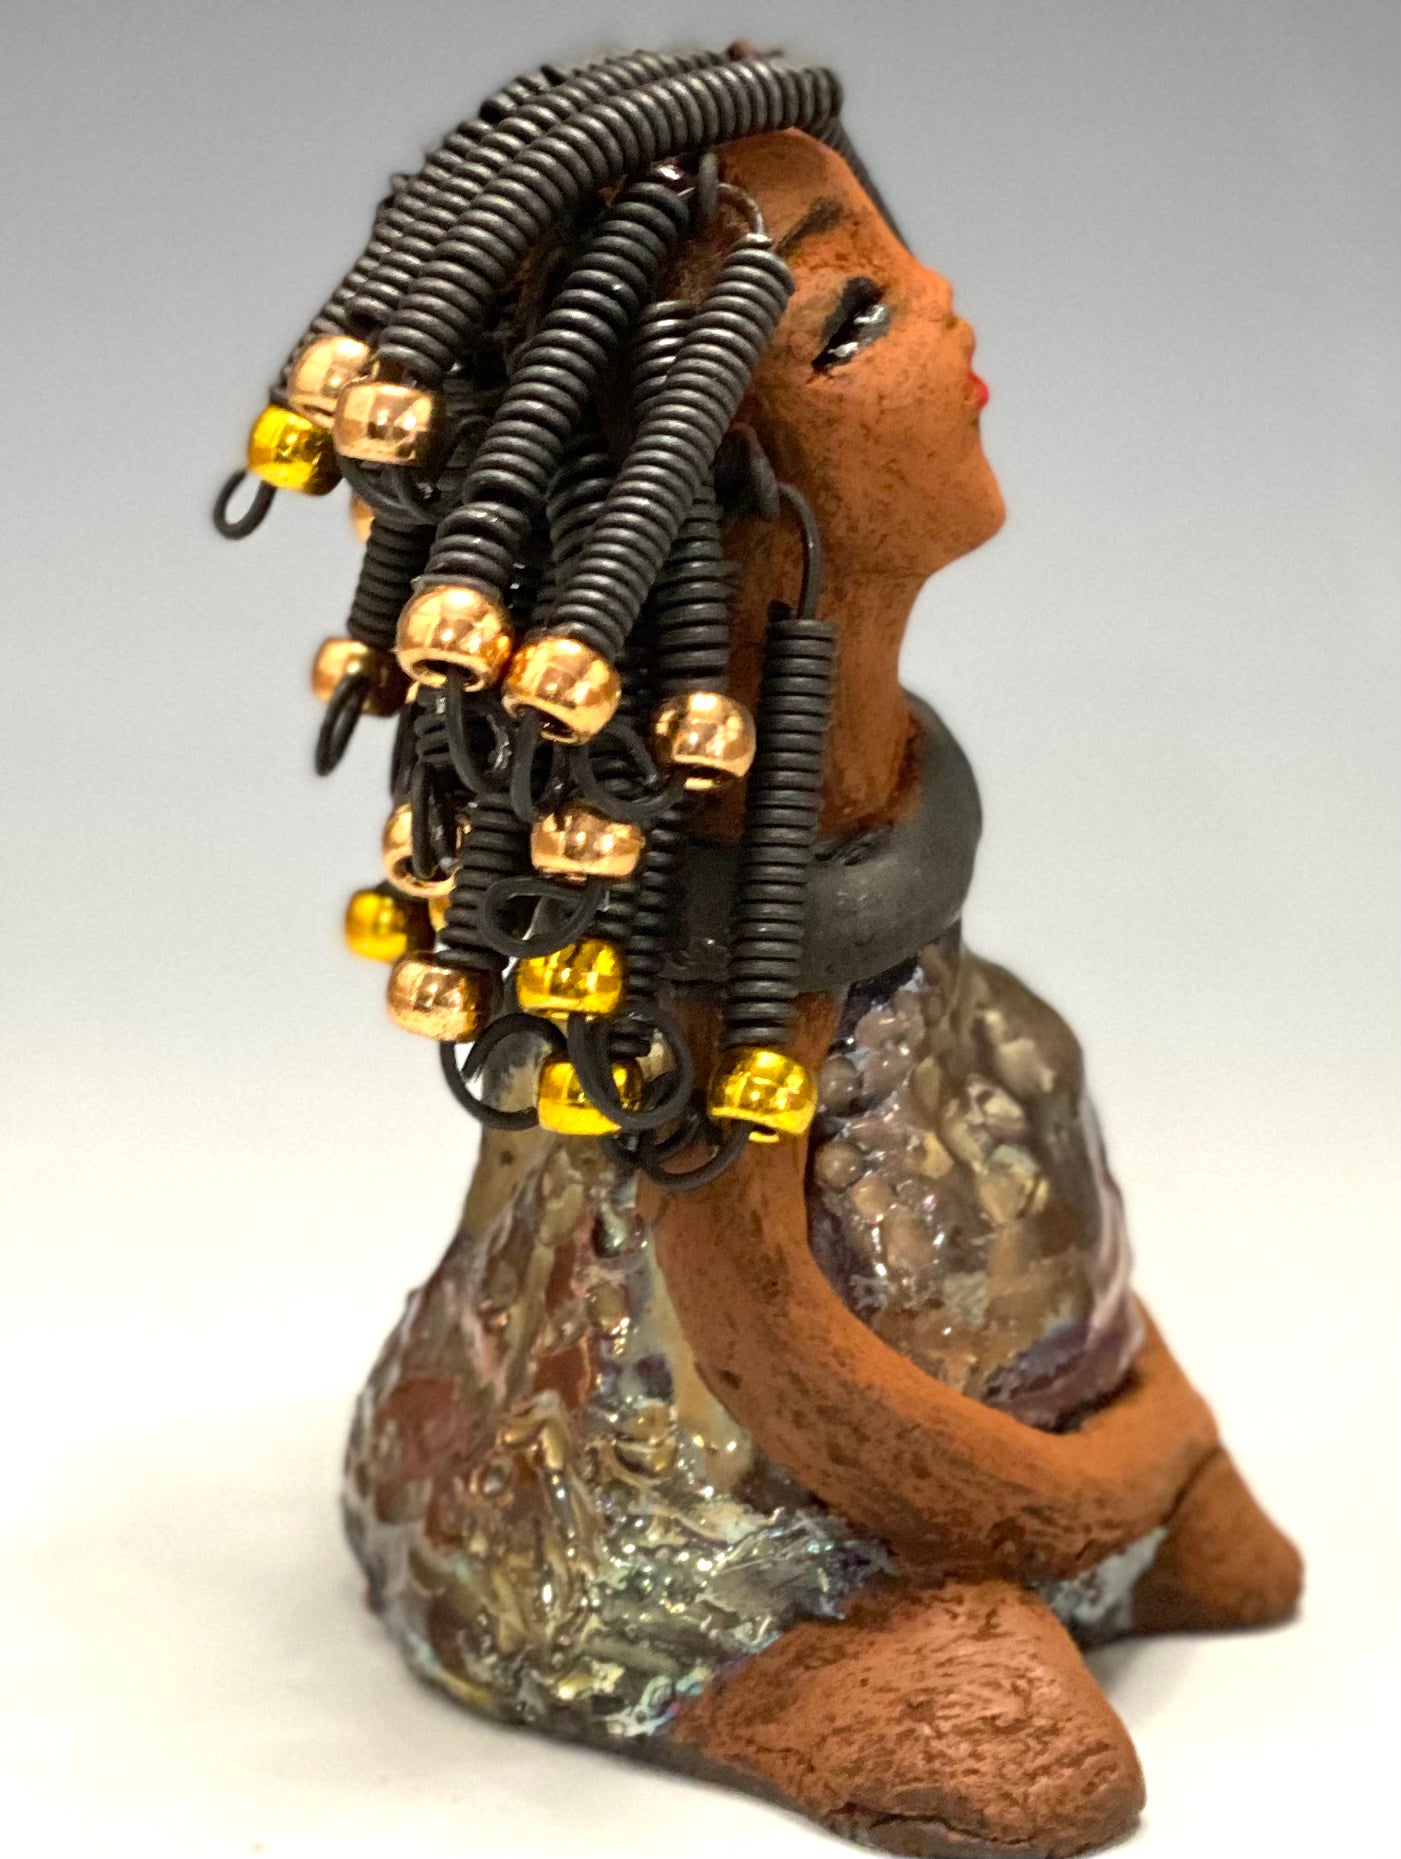   Meet Sadie  Sadie stands 5.5" x 4" x 3" and weighs 8.7 ozs. She wears a lovely glossy  metallic gold dress.. Sadie has over15 feet of coiled wire hair. Sadie appears to sit in a yoga pose. Her long arms rest at her side. Sadie is a great starter piece from the Herdew Collection!